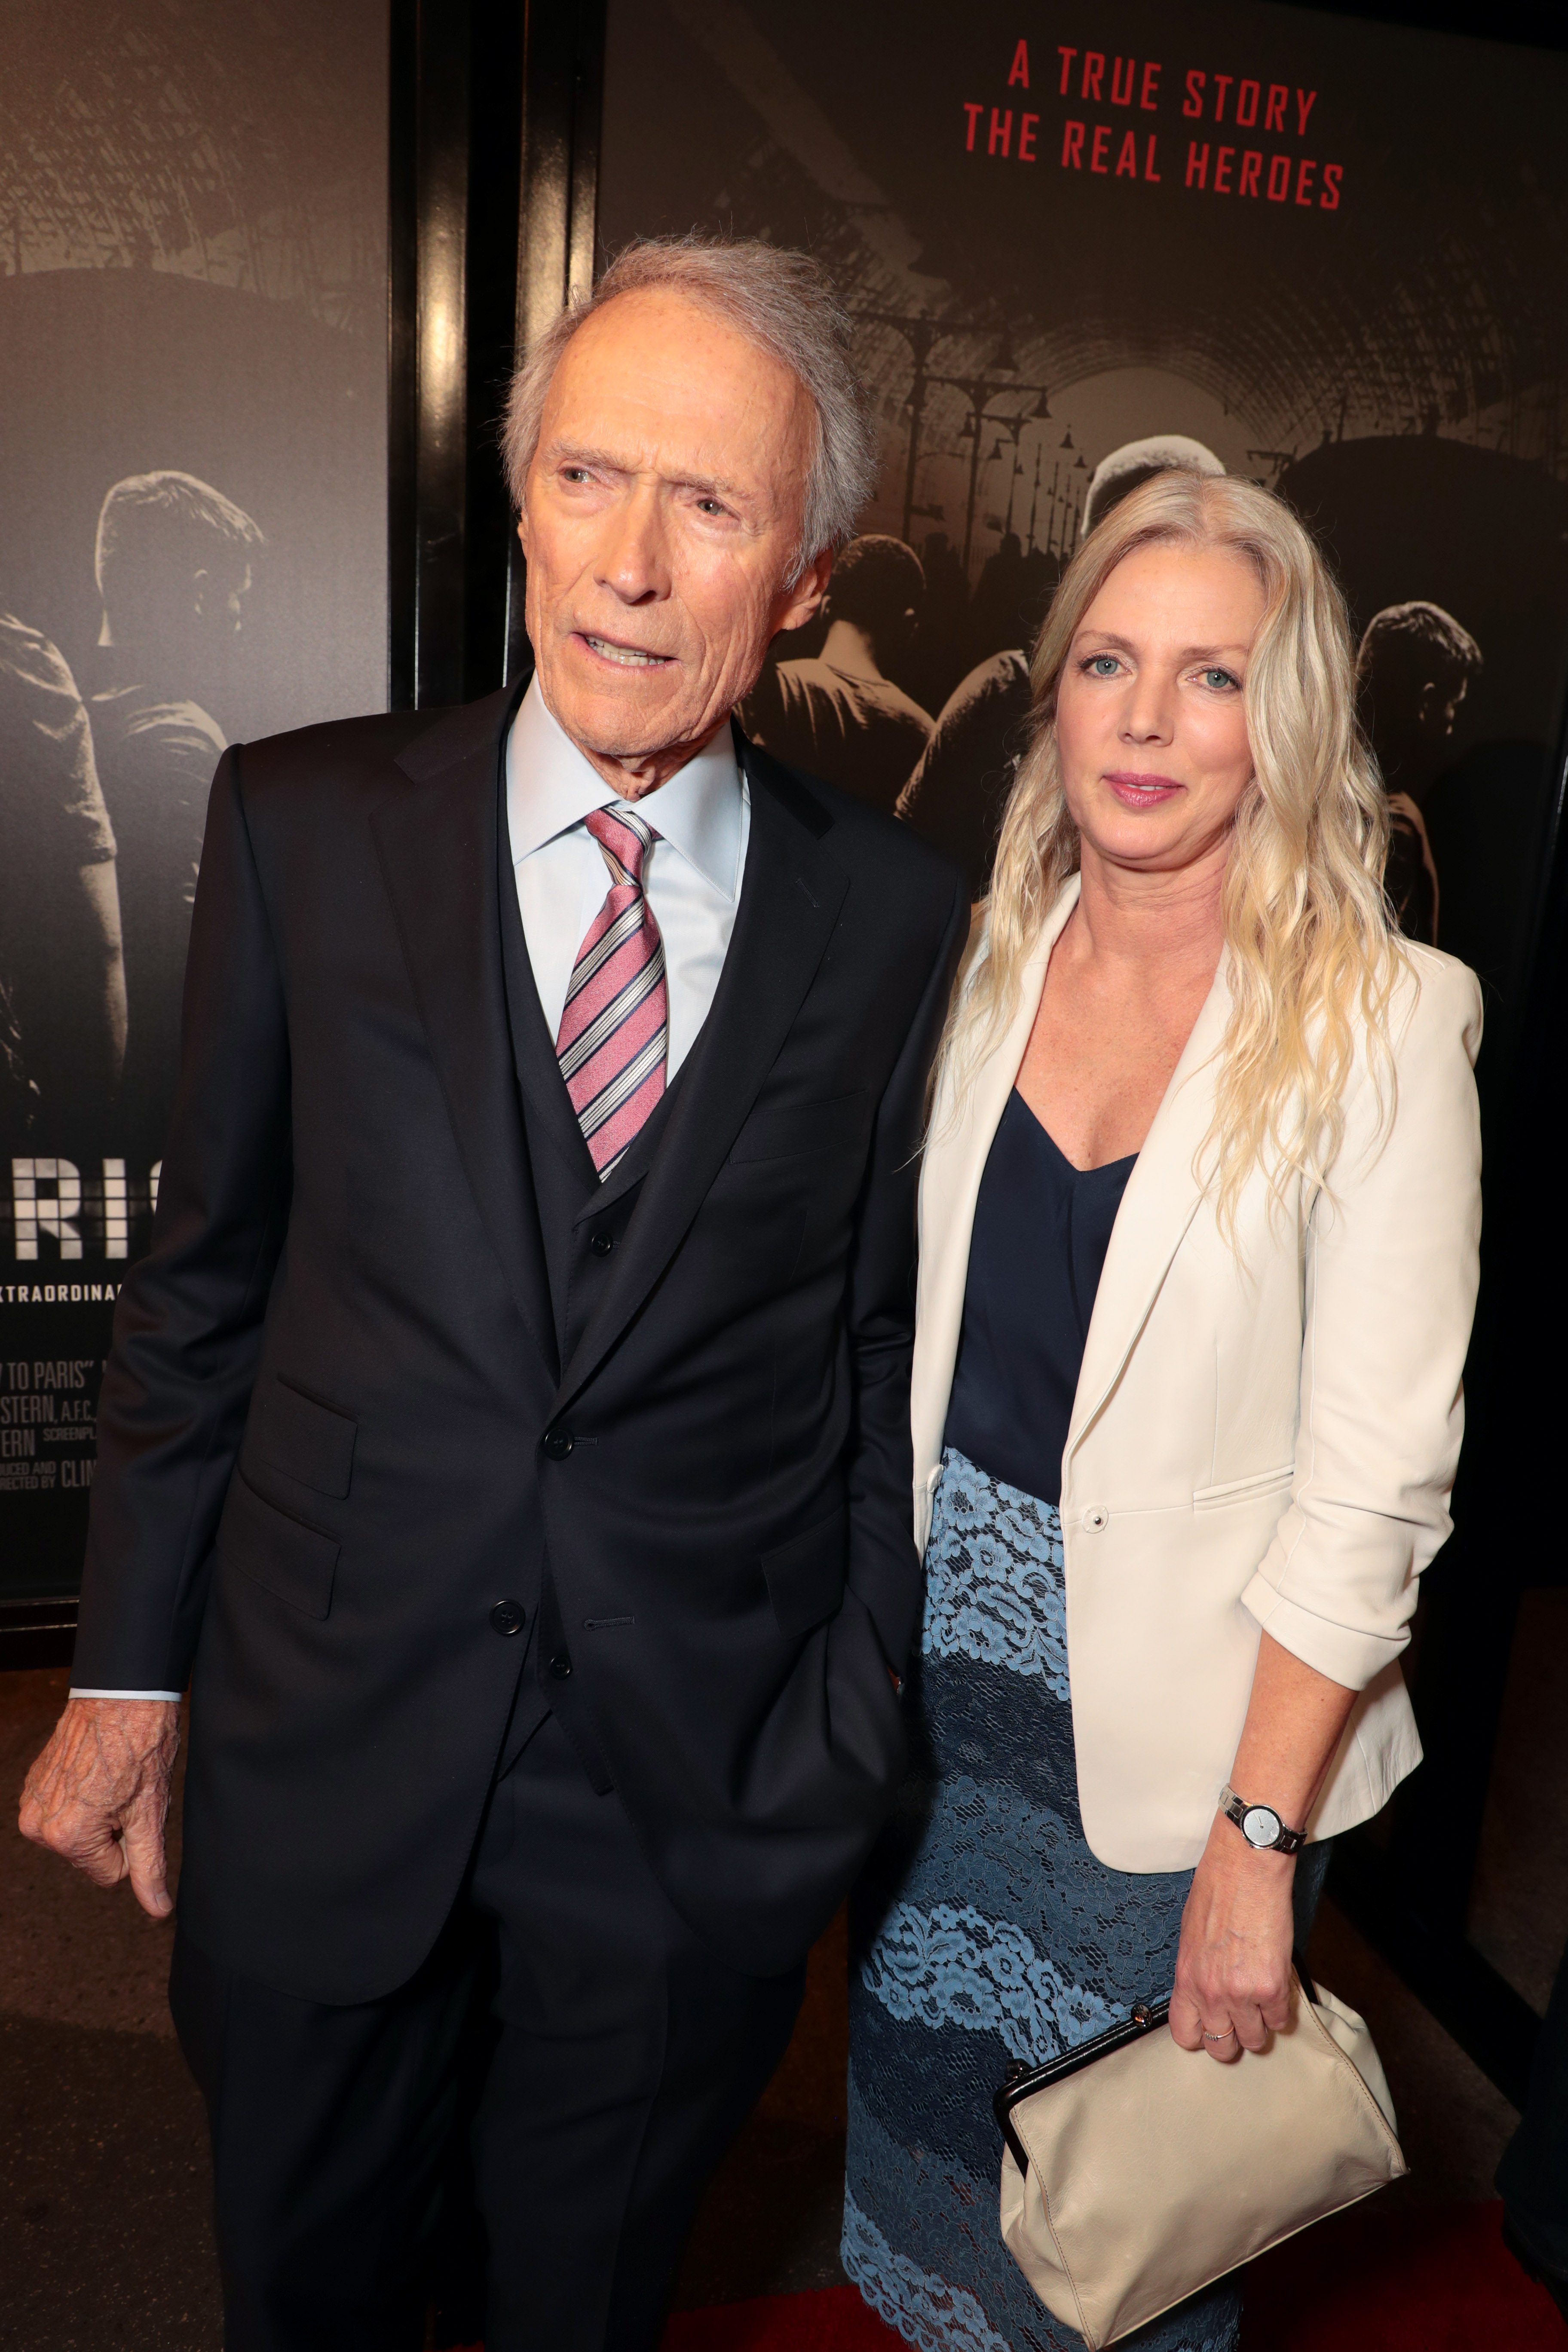 Clint Eastwood and Christina Sandera attend the premiere of The 15:17 to Paris on February 5, 2018